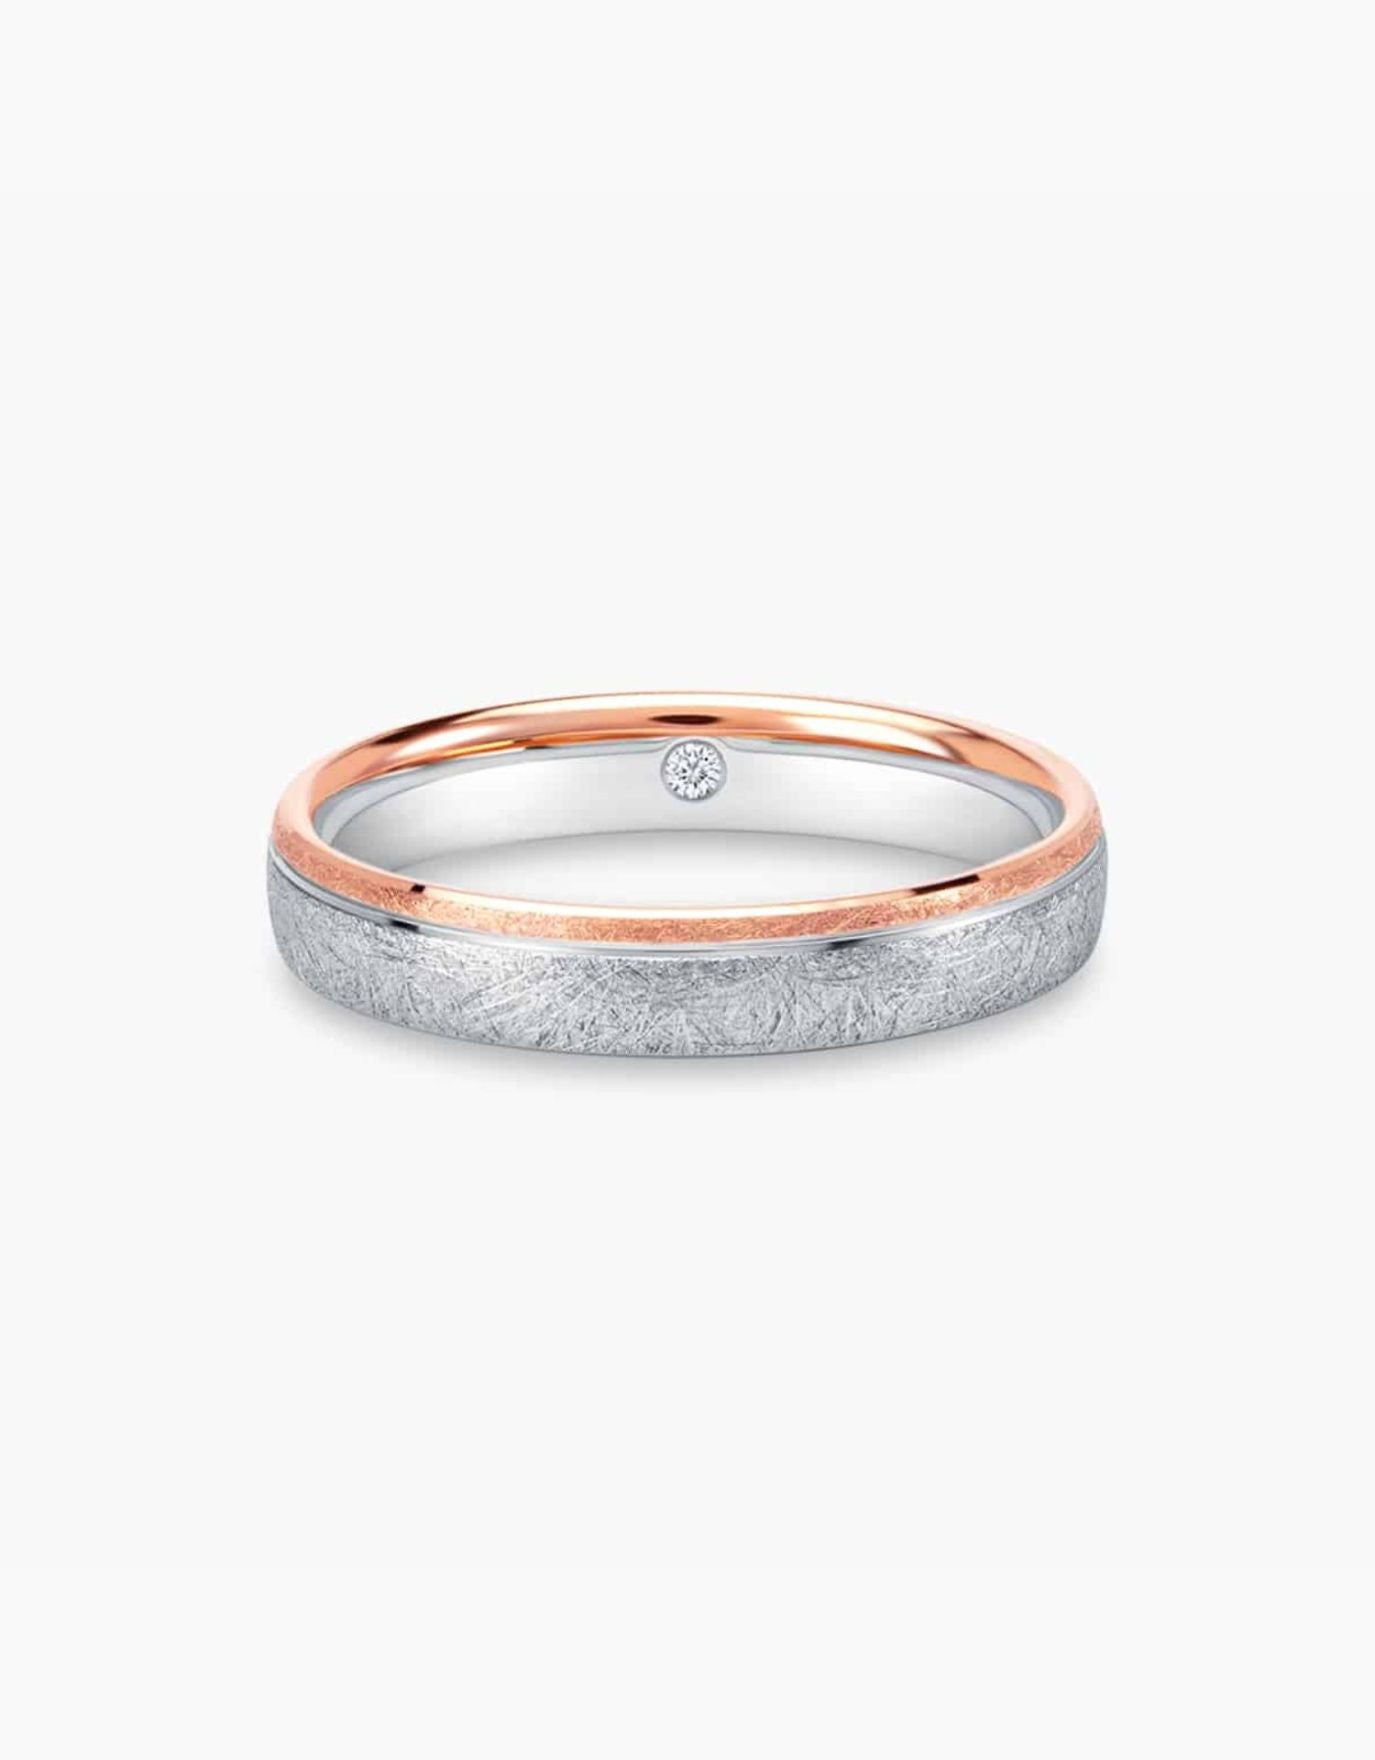 LVC Soleil Wedding Band in White and Rose gold with an Inner Diamond